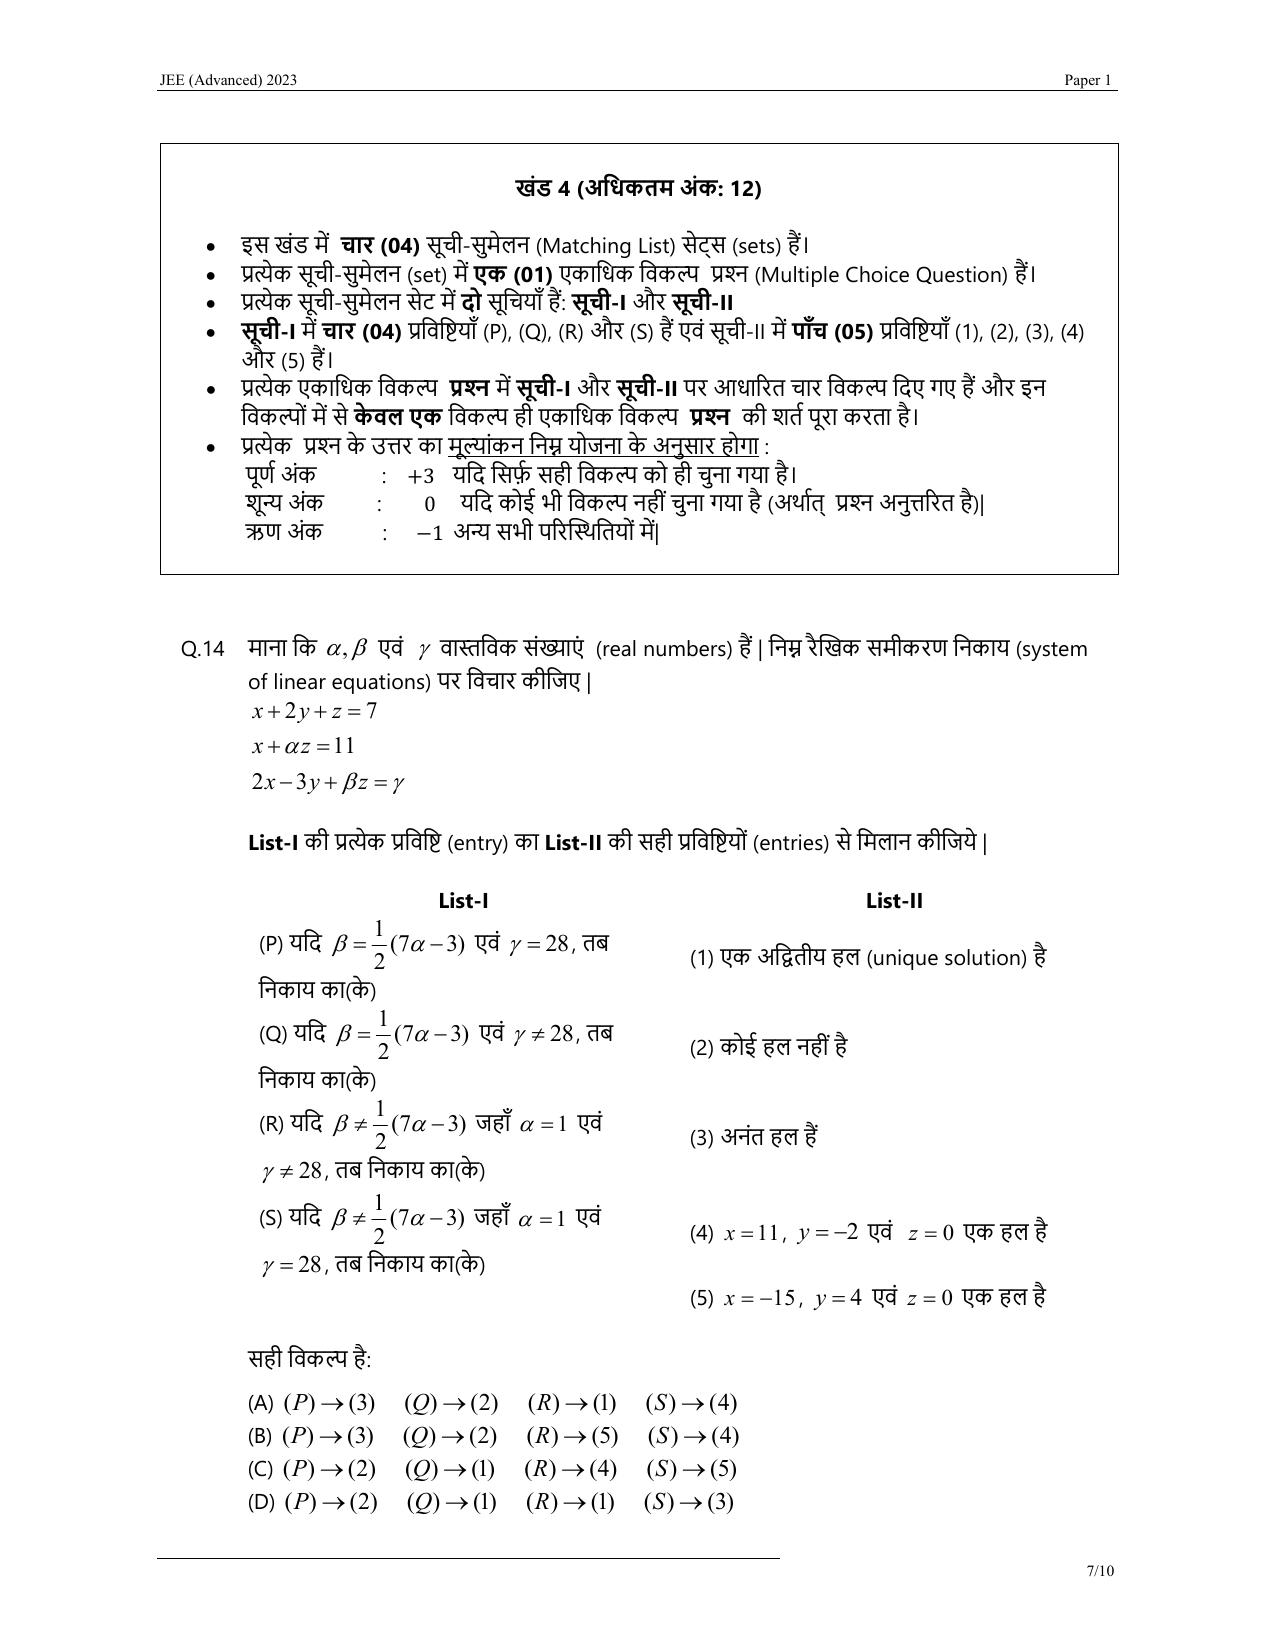 JEE Advanced 2023 Question Paper 1 (Hindi) - Page 7